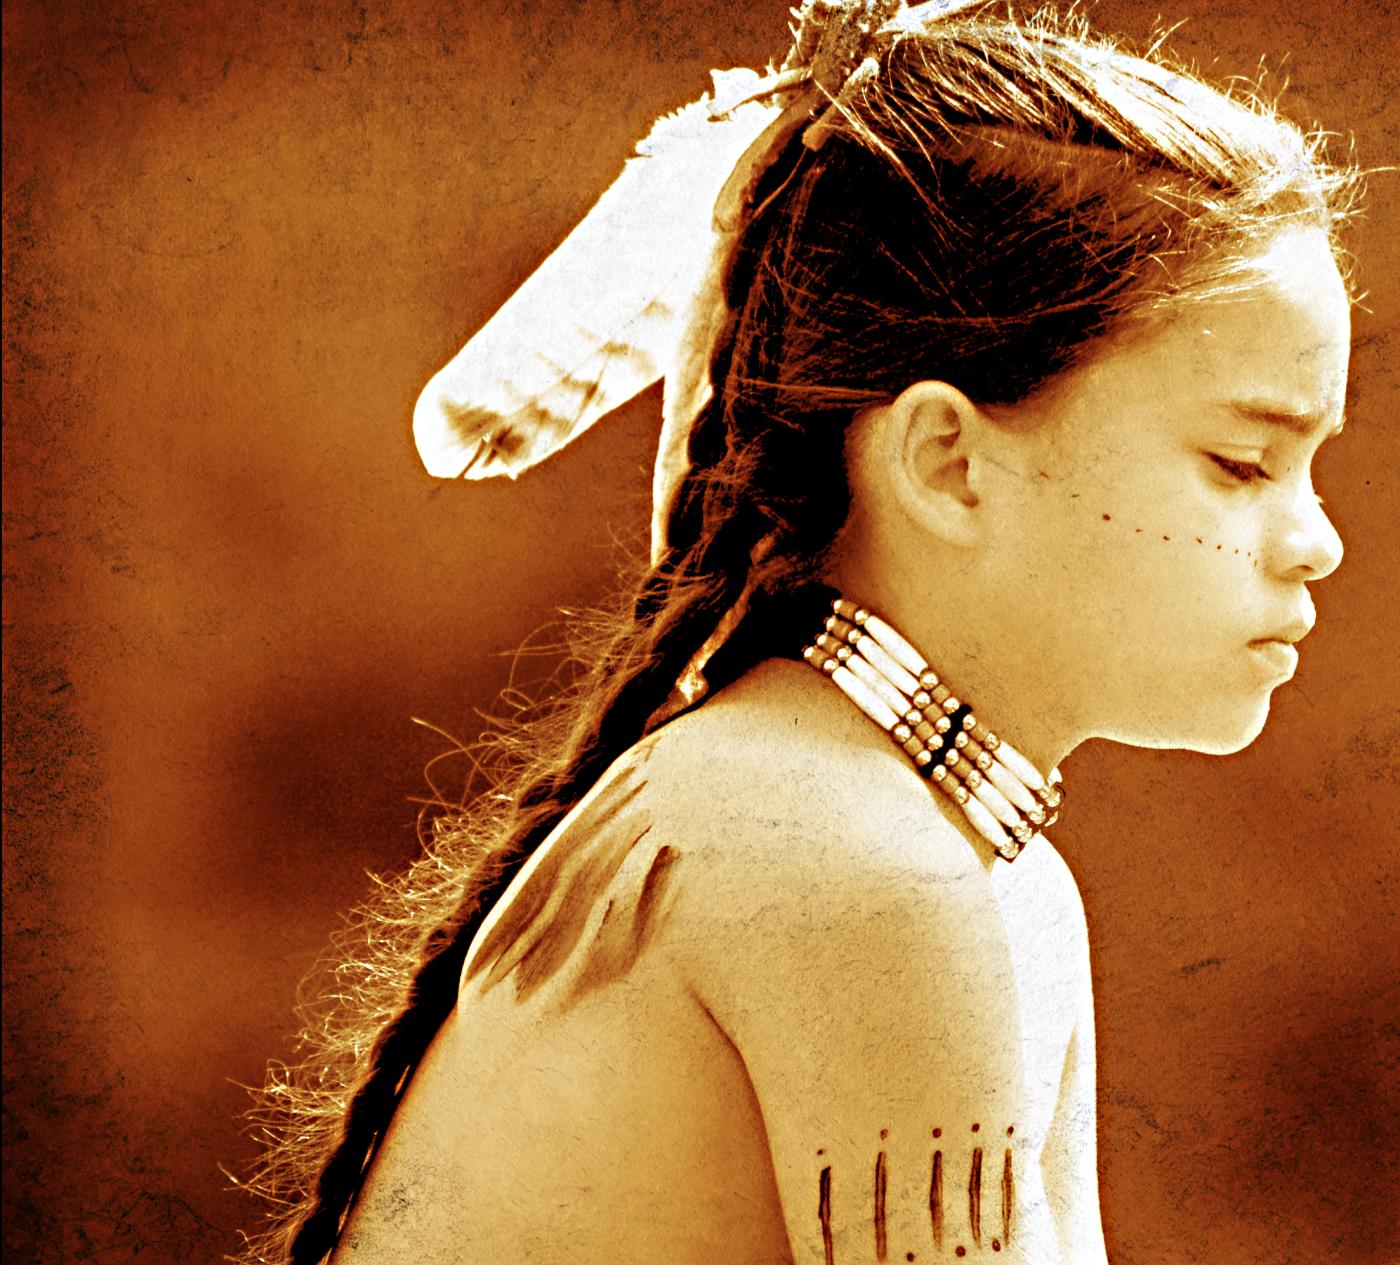 A young boy wears a feather in her braid, a beaded choker, and body paint.